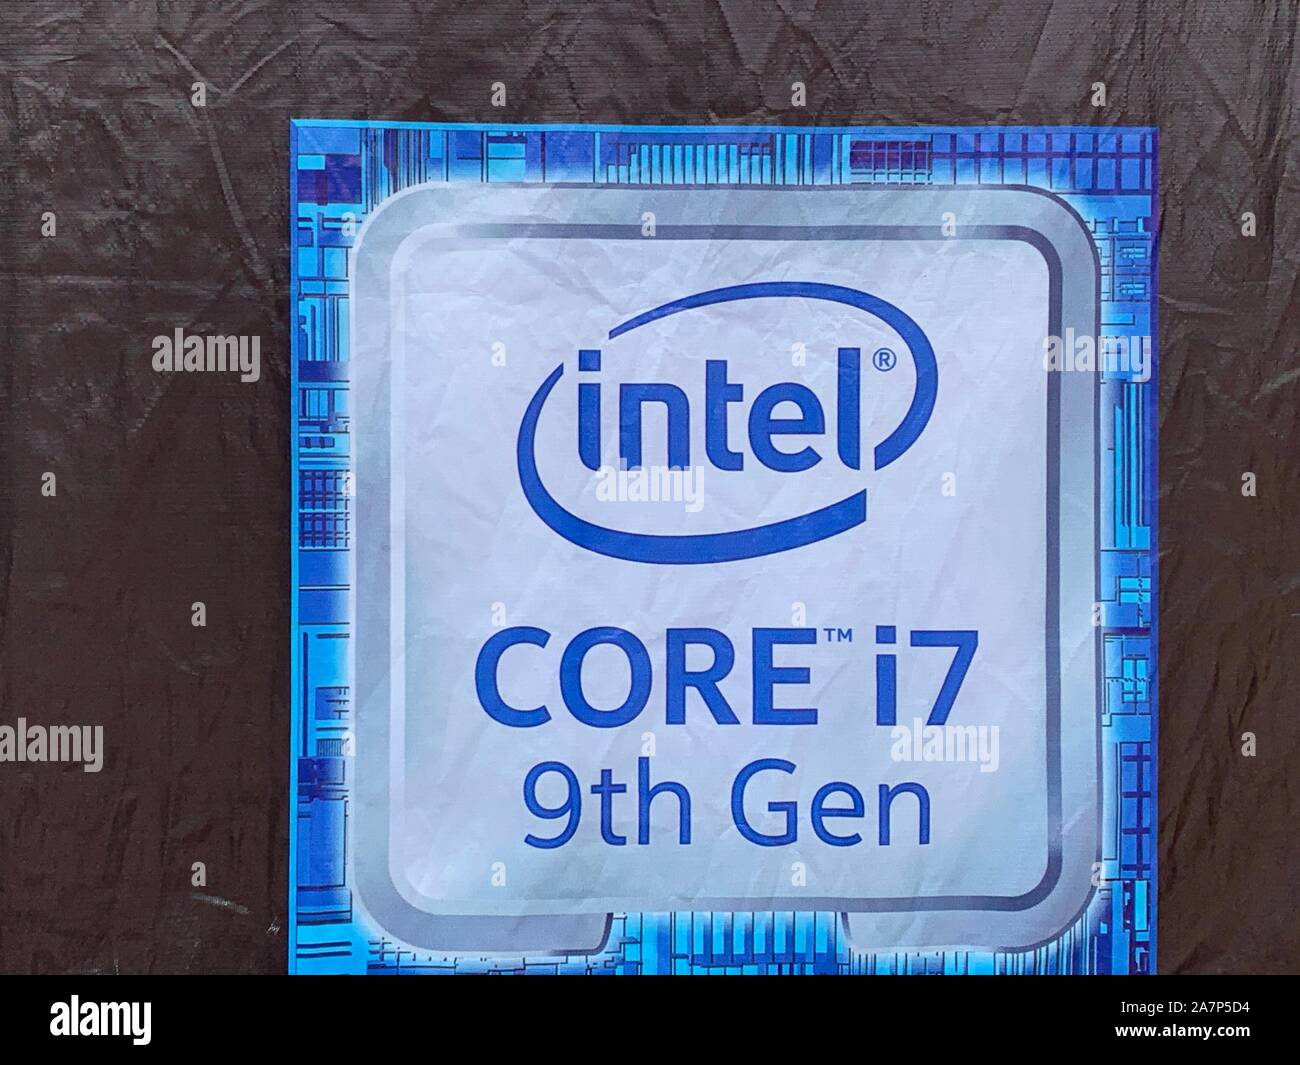 FILE--A logo of Intel 9th Generation Core i7 is seen during an expo in  Wuhan city, central China's Hubei province, 16 June 2019. The United States  Stock Photo - Alamy